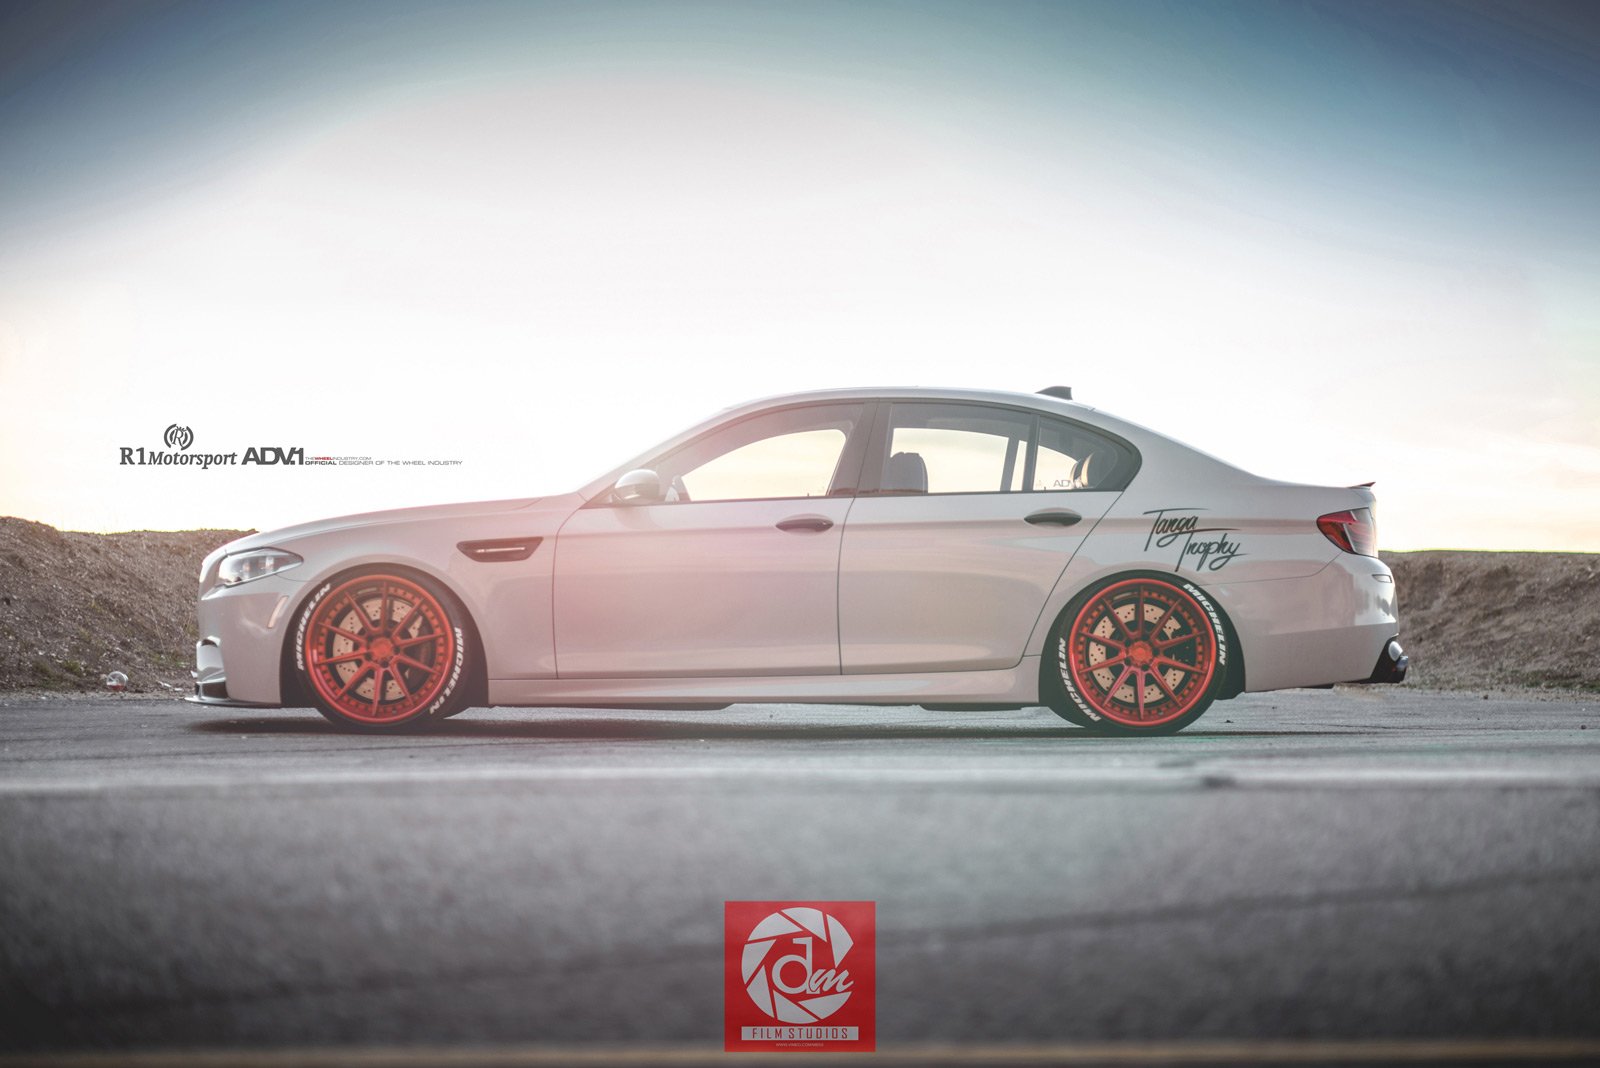 2015, Adv1, Wheels, Bmw, M5, F10, Cars, Coupe, Tuning Wallpaper